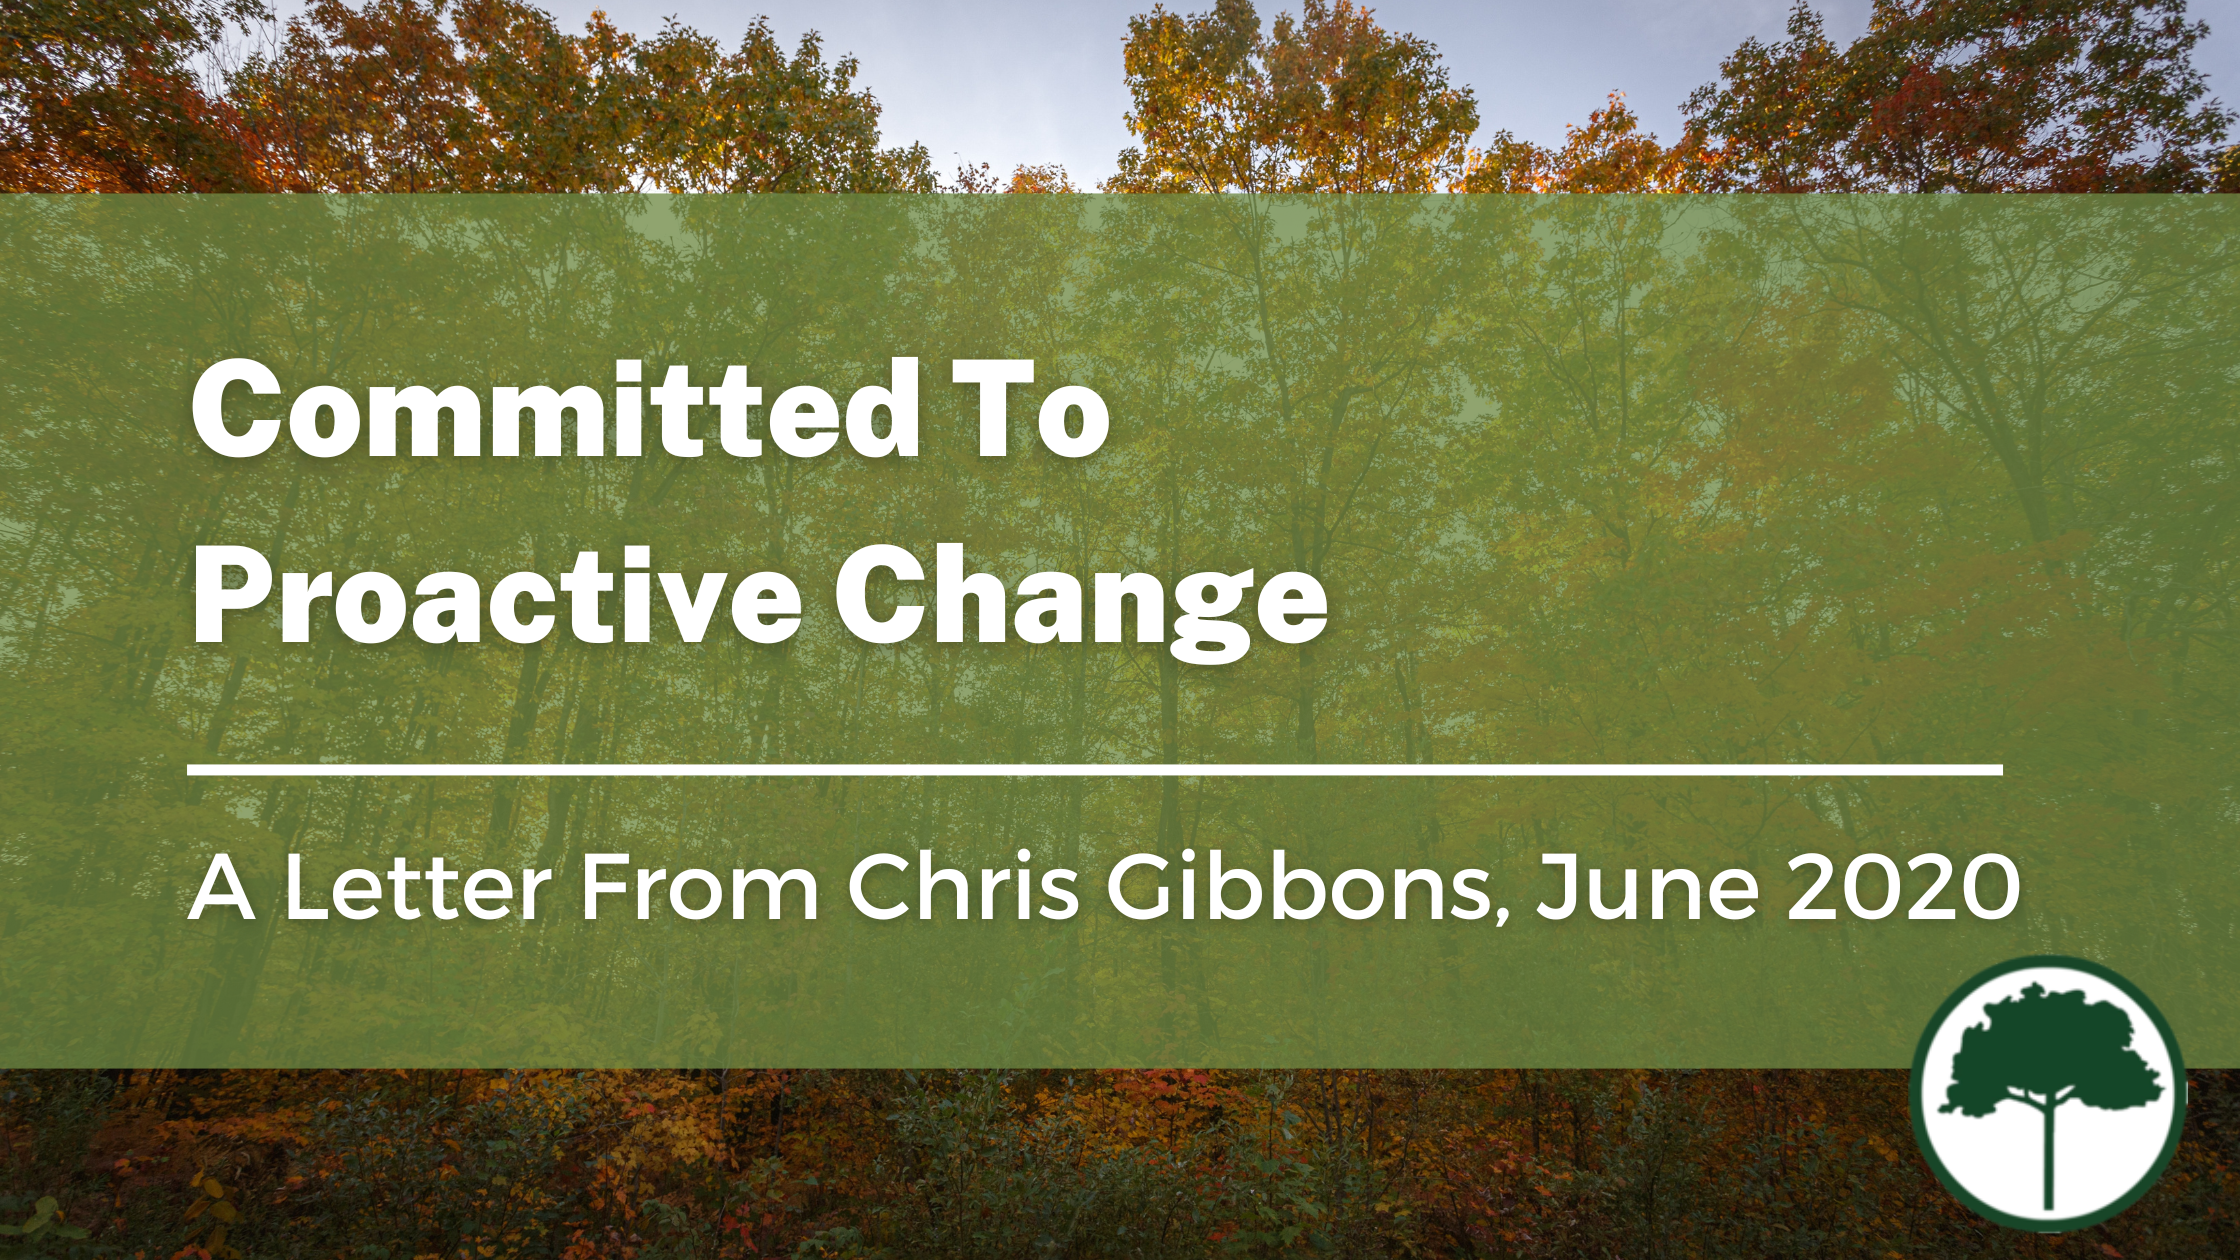 Text reads: Committed To Proactive Change, a letter from Chris Gibbons, June 2020